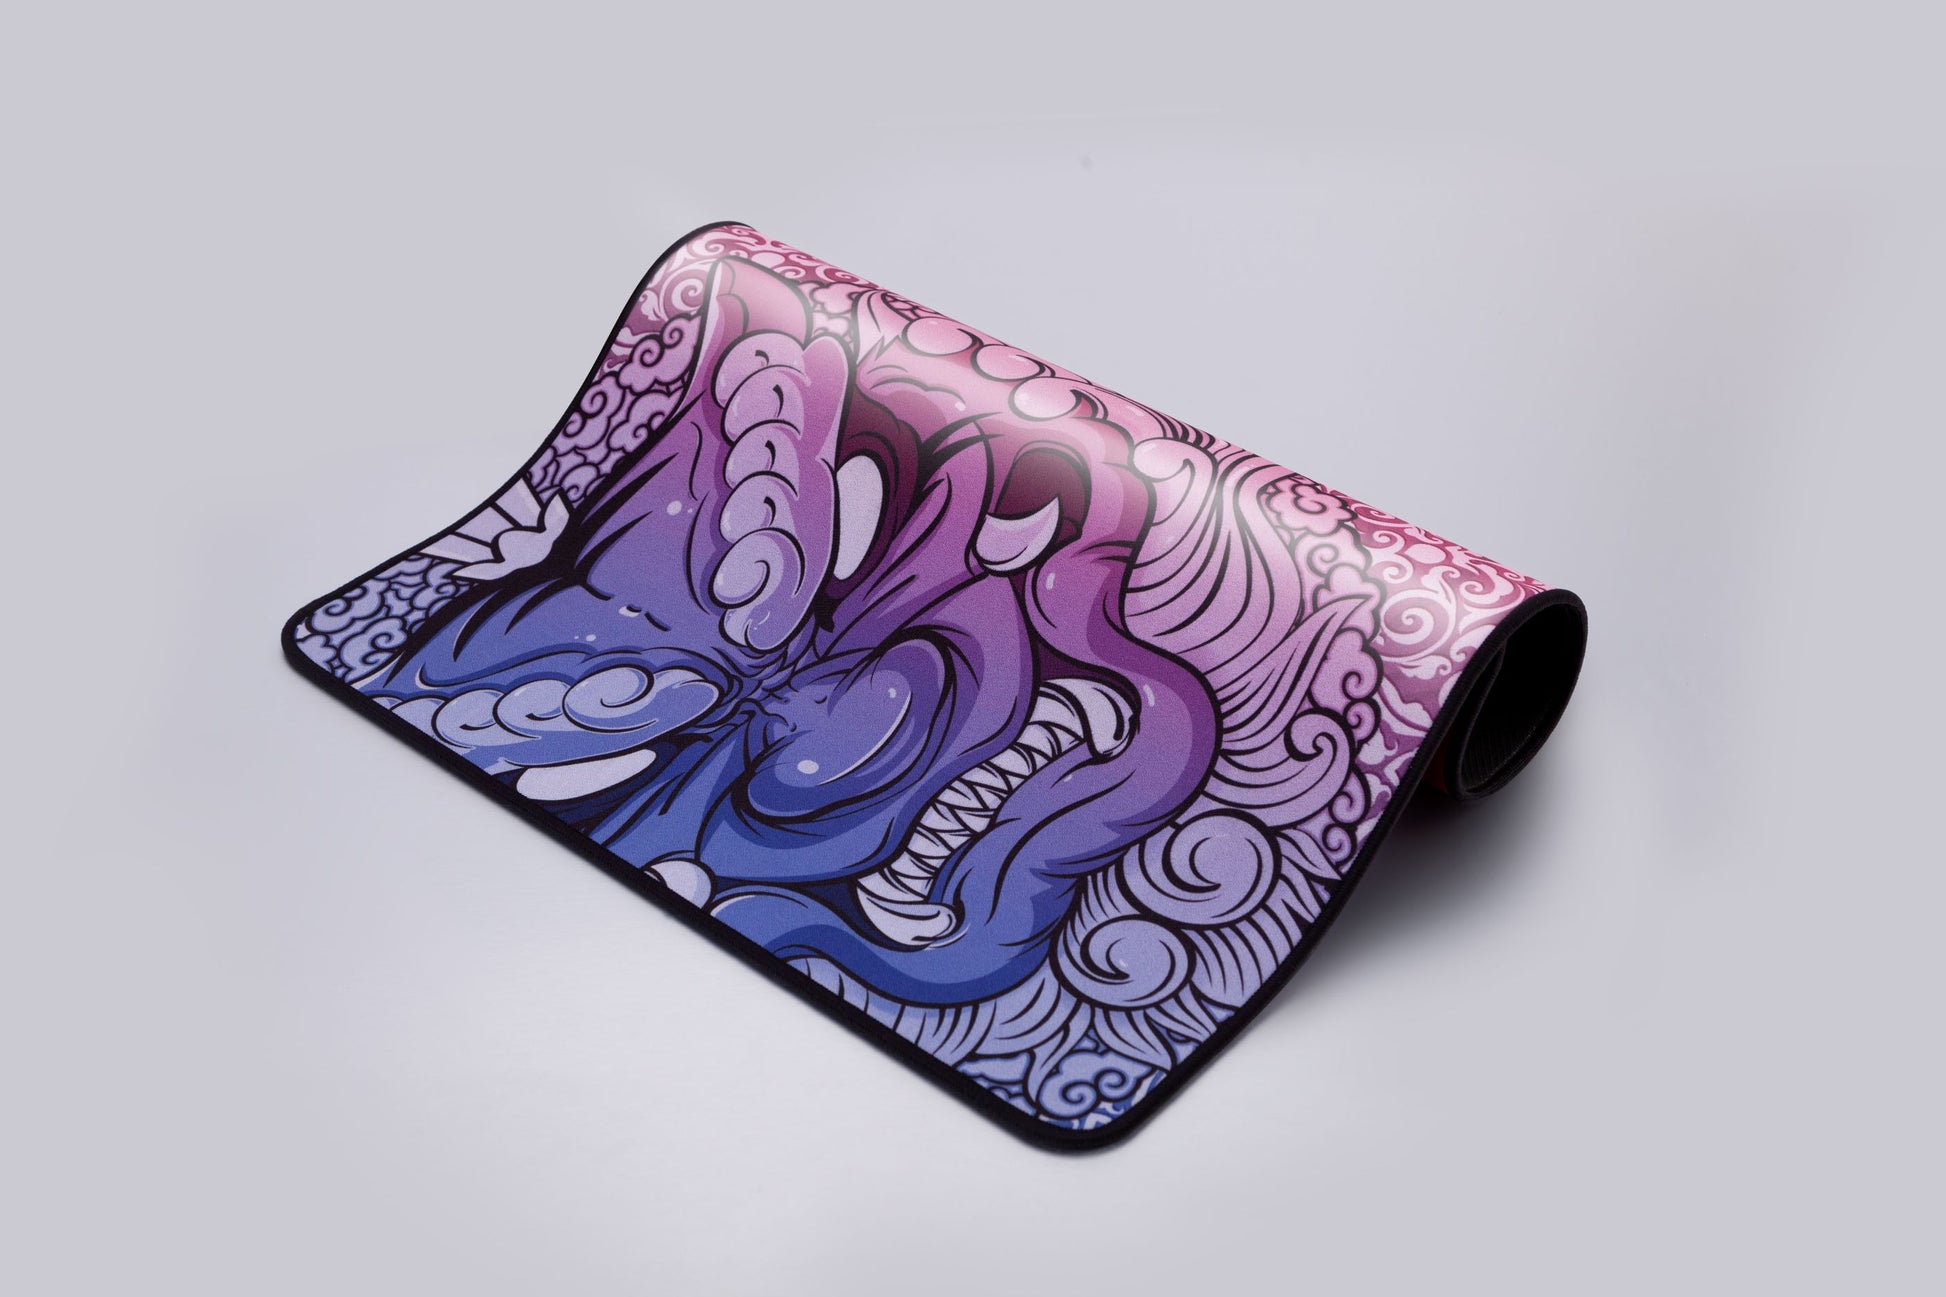 LongTeng HuoYun Special Edition - Large Gaming Mouse Pad